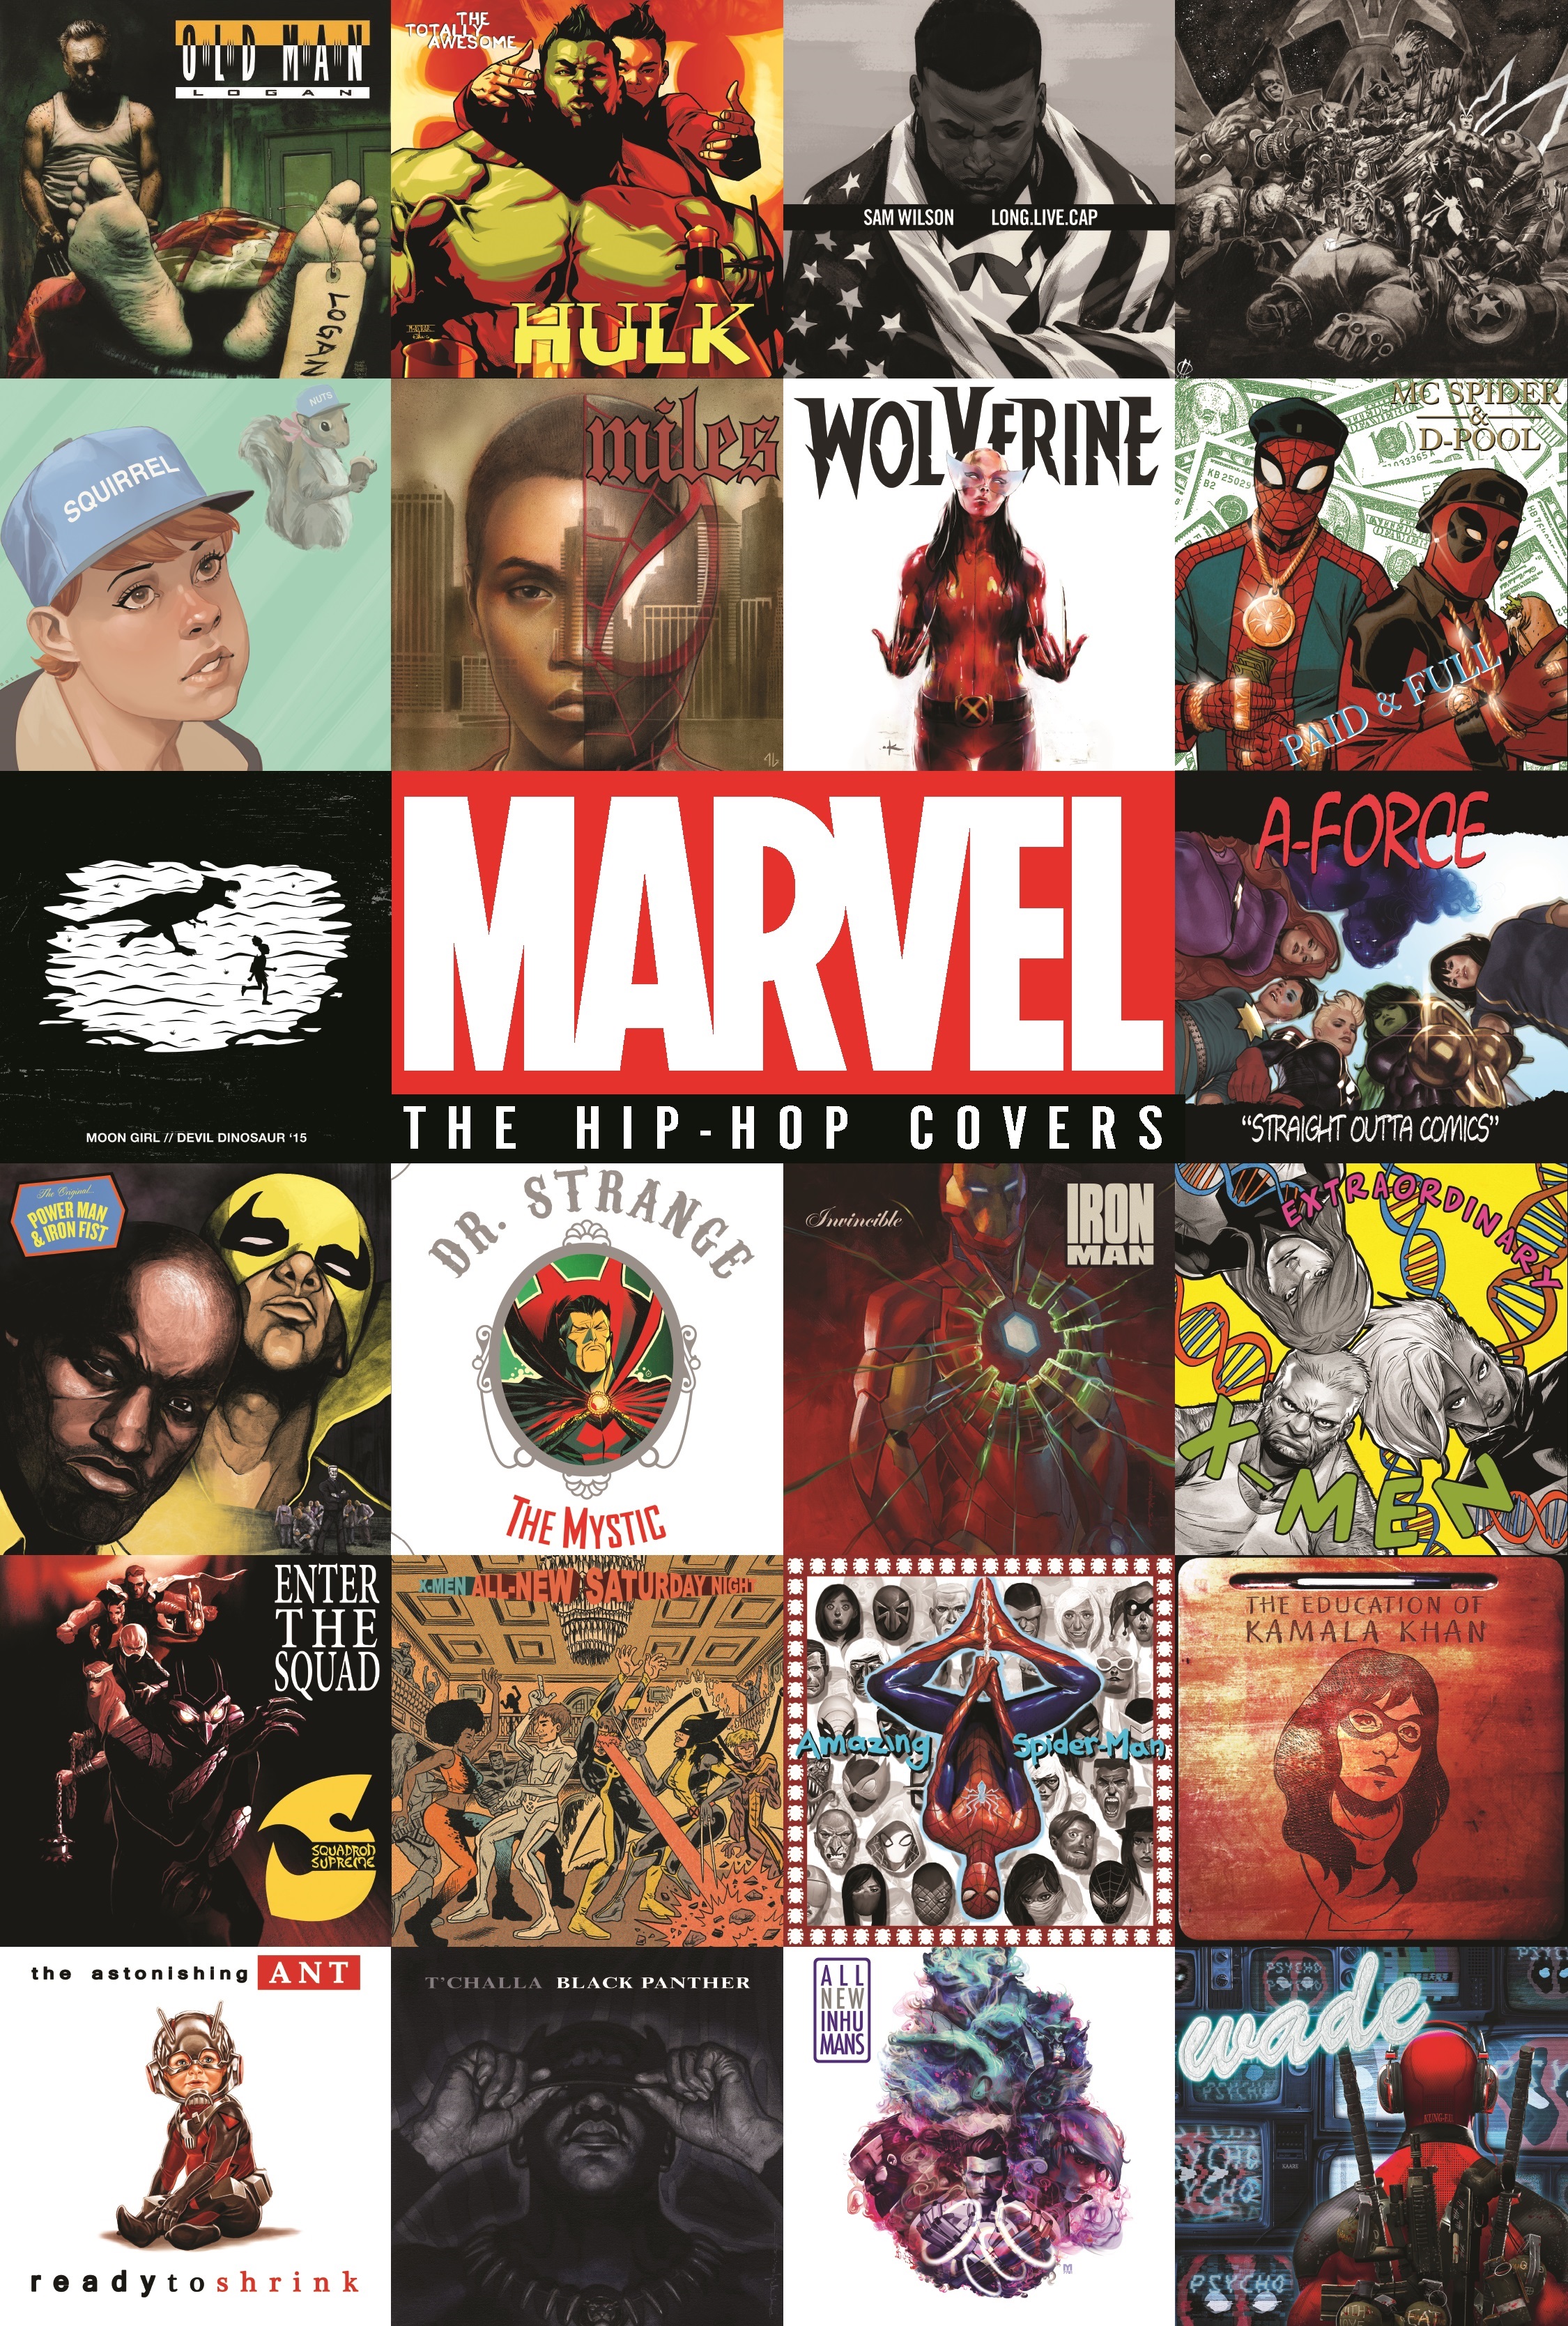 Marvel The HipHop Covers Vol. 1 (Hardcover) Comic